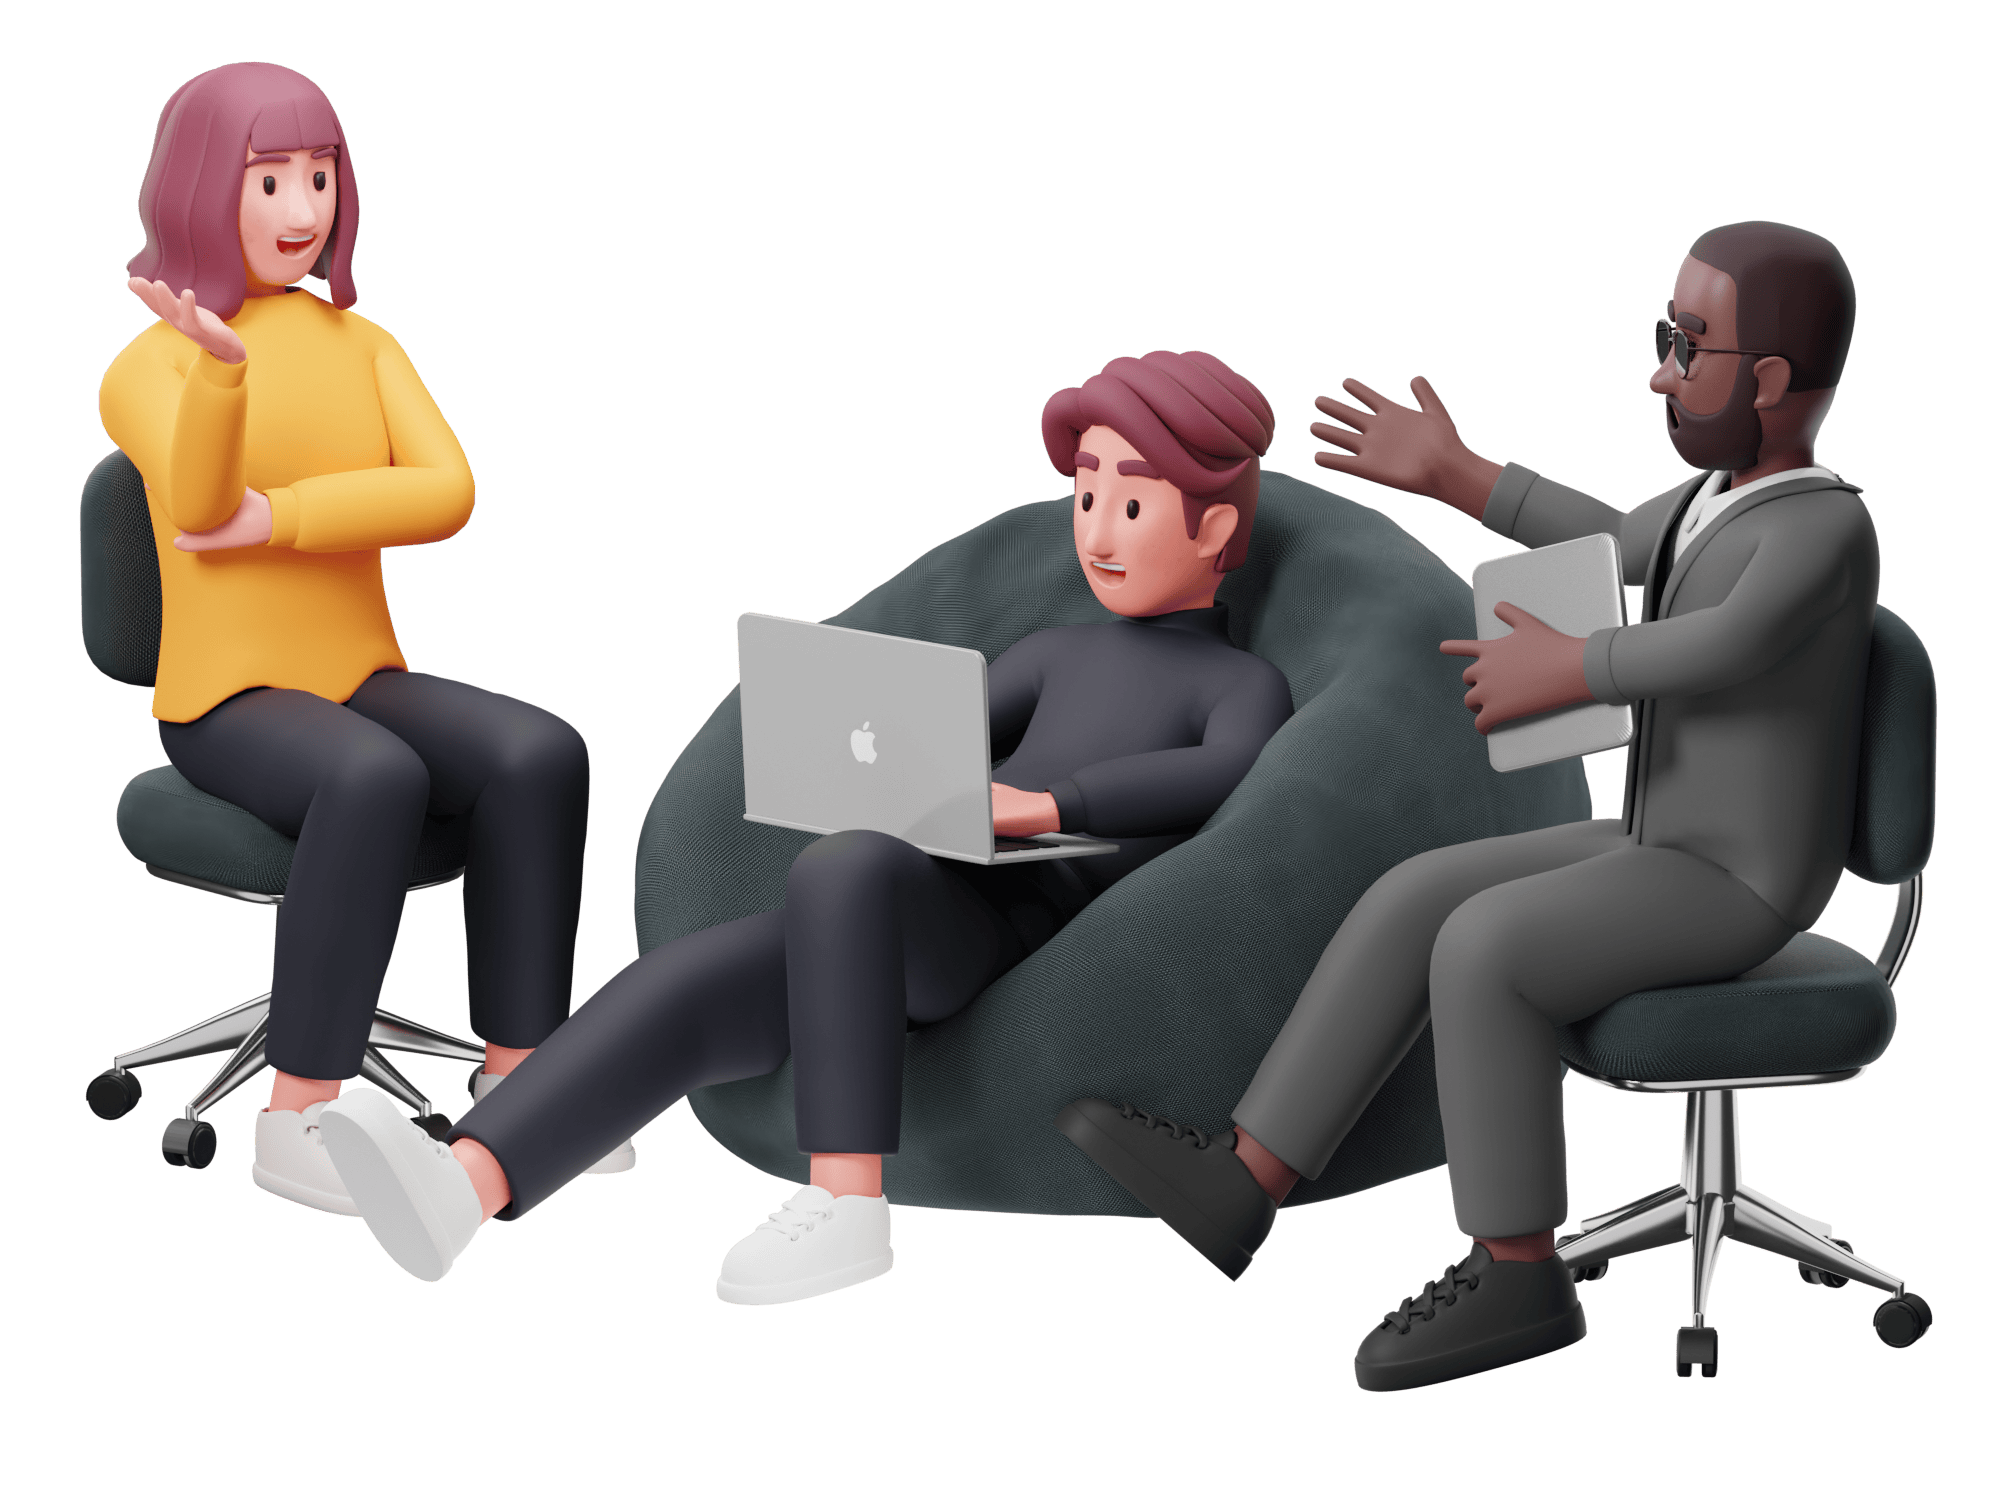 A 3D illustration of three animated characters engaged in a business meeting.